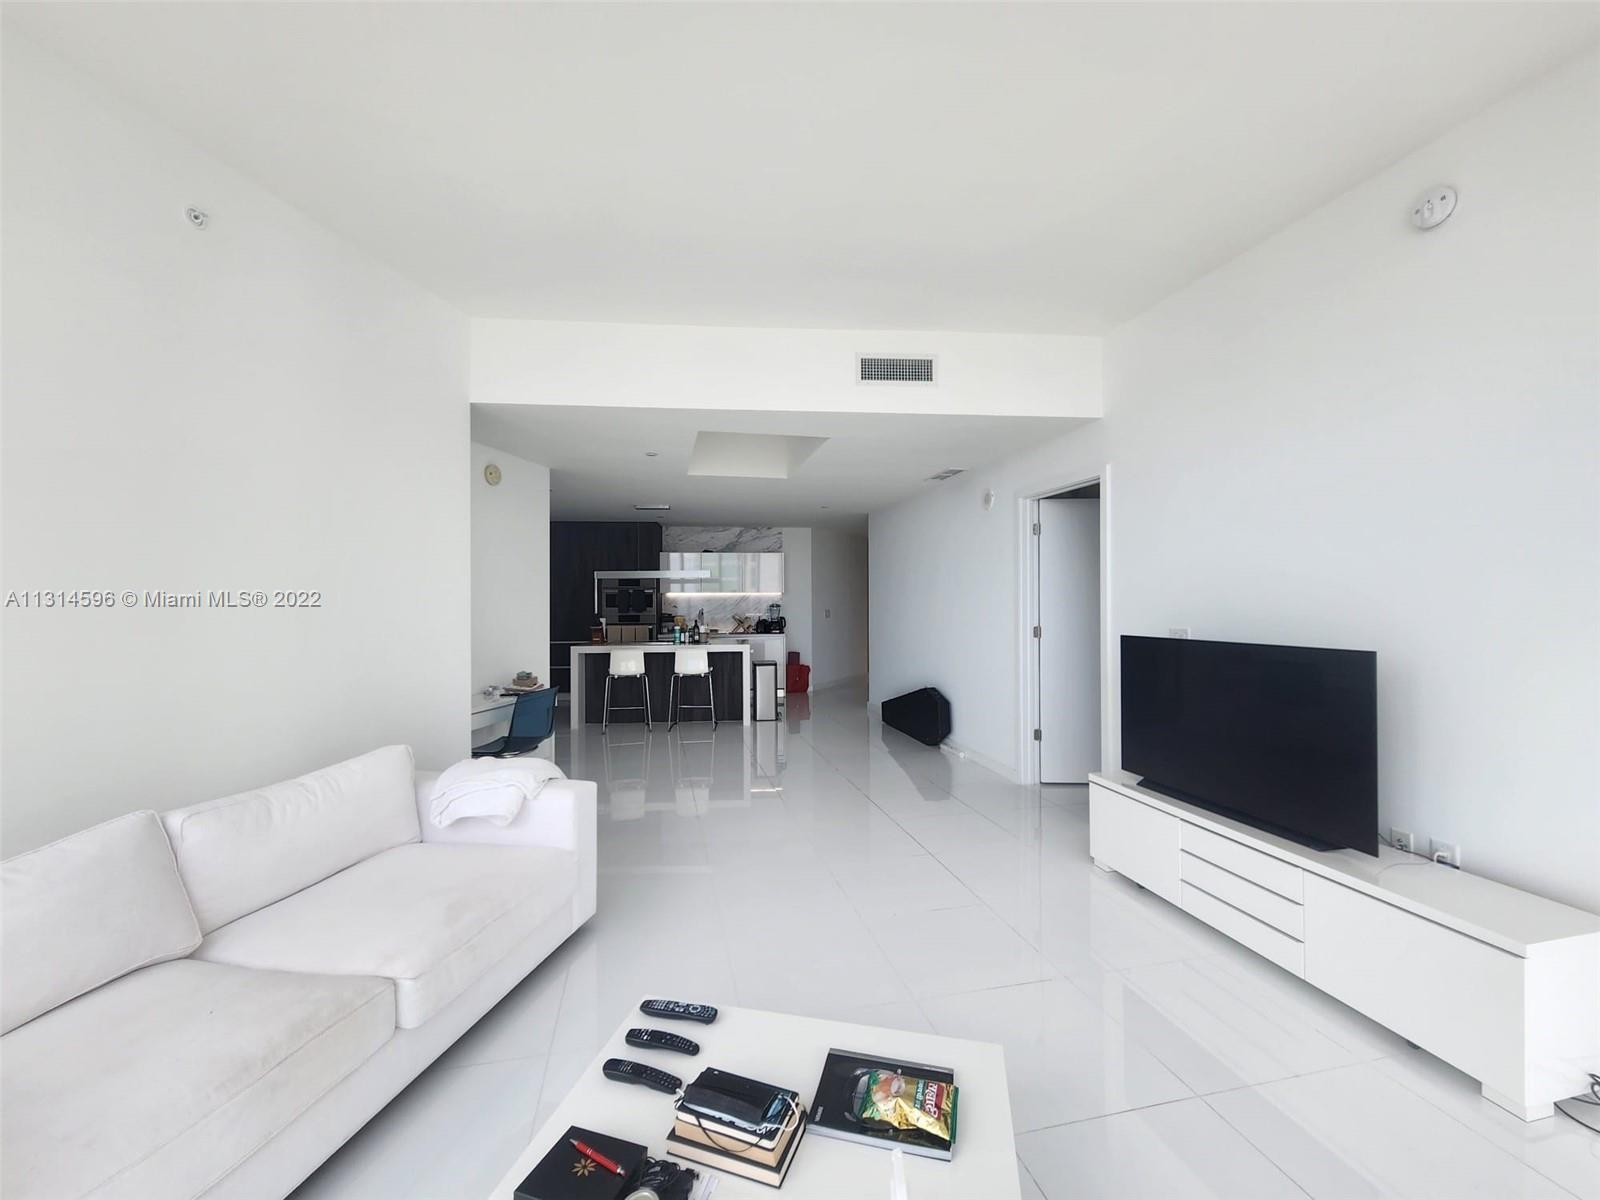 Luxurious and highly desirable 2 Bed + Den /3 bath residential Condo at the Paramount Miami WorldCen